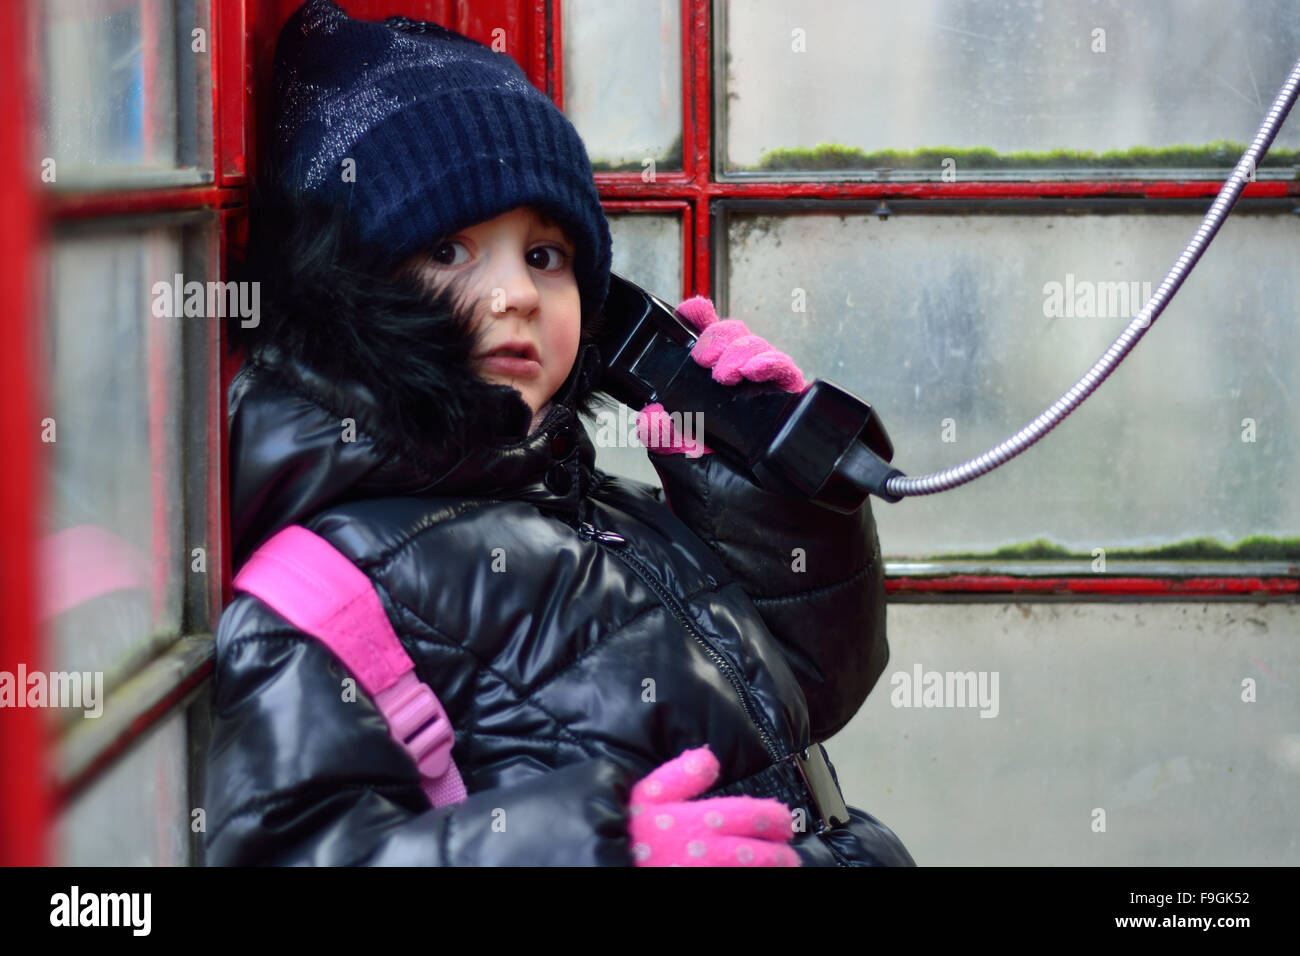 Child in a red telephone box, on the phone. A girl pretends to make a call in a public phone box, dressed warmly for winter Stock Photo